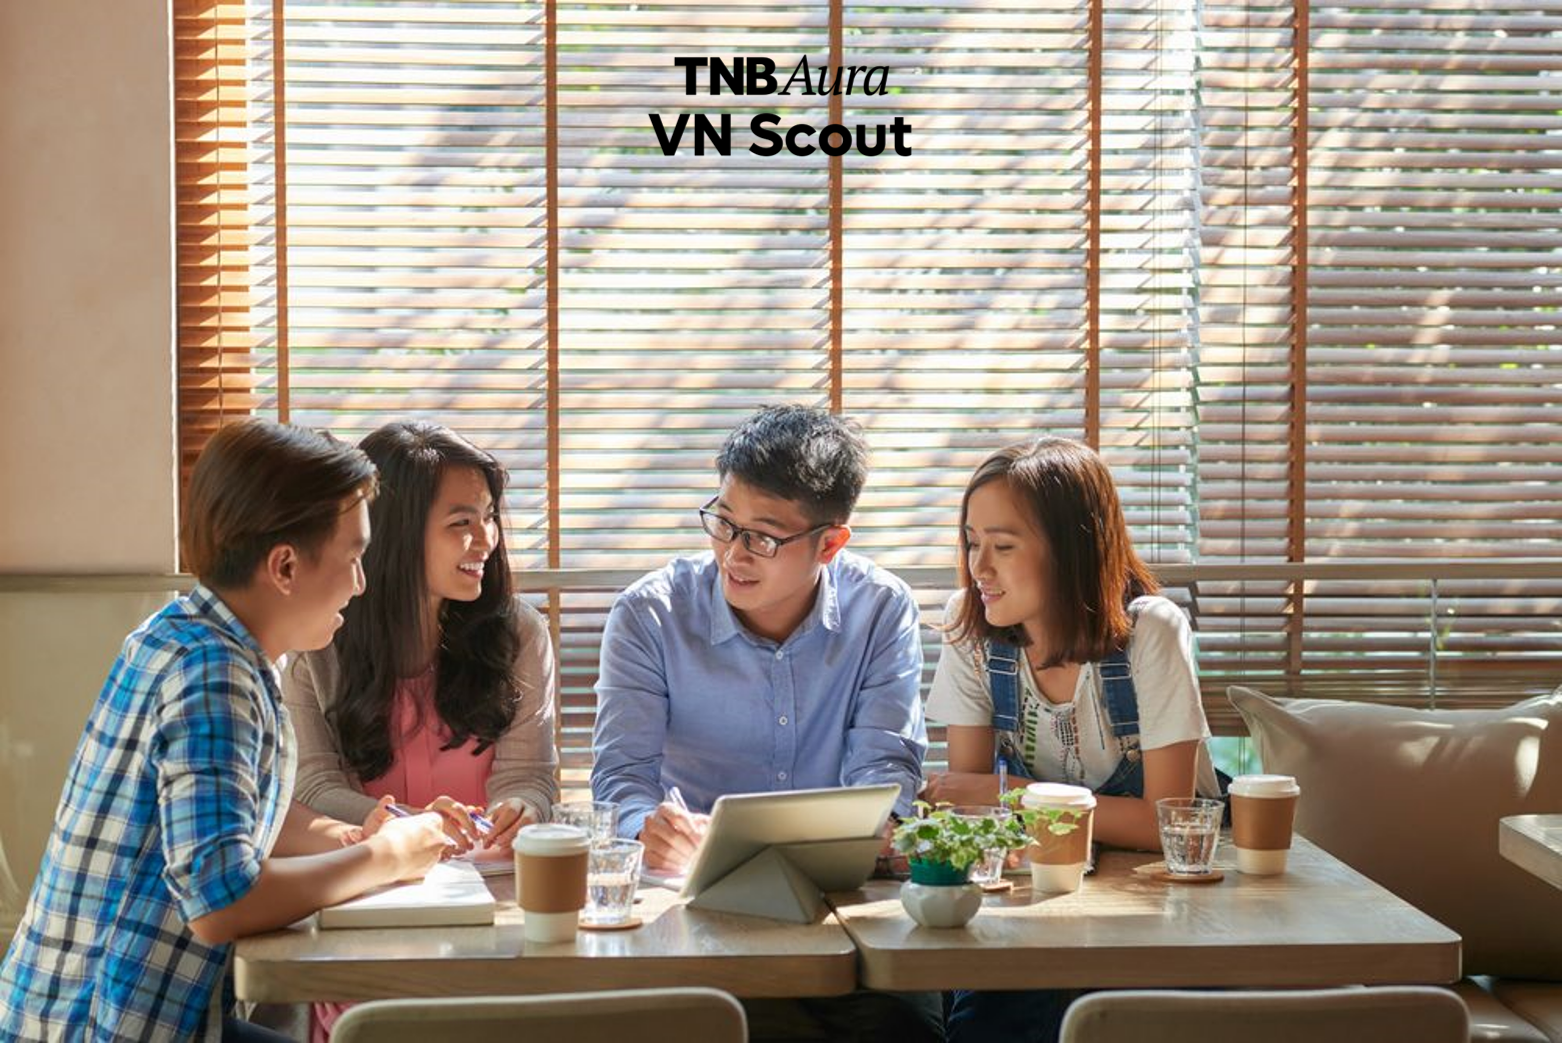 TNBA VN Scout: A dedicated investment vehicle for Vietnam founded by TNB Aura